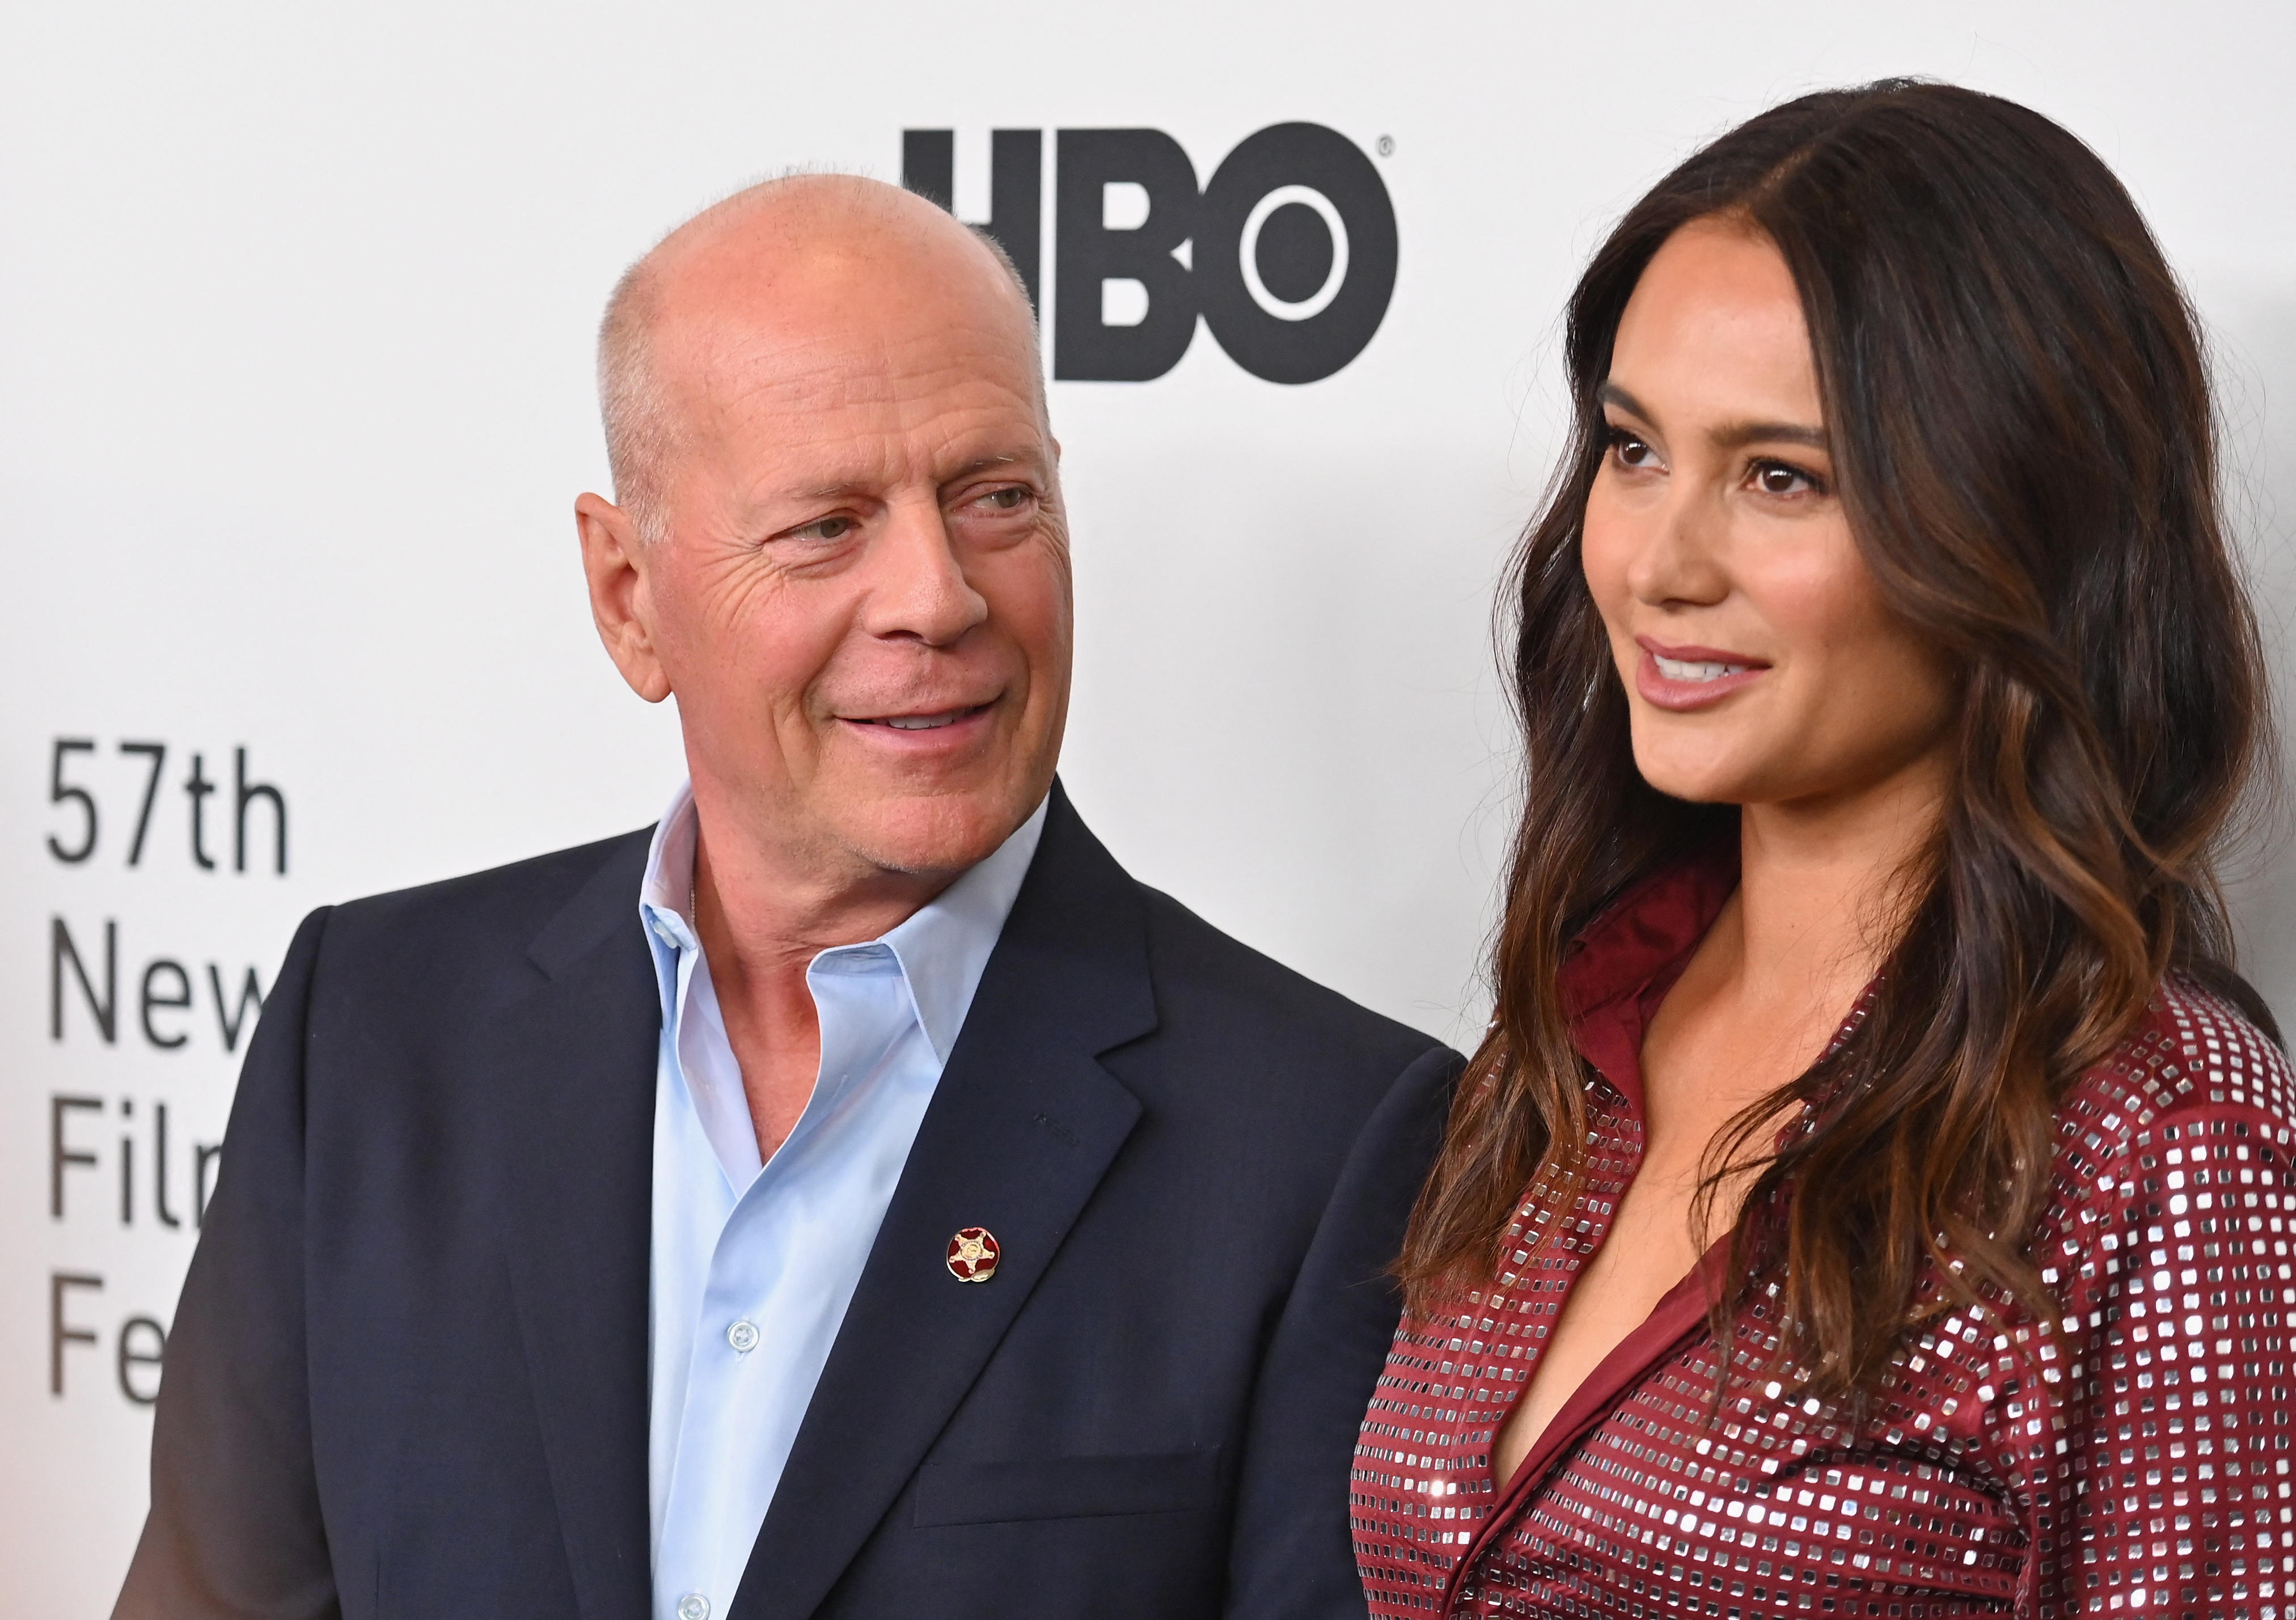 Bruce Willis and Emma Heming in New York City on October 11, 2019 | Source: Getty Images